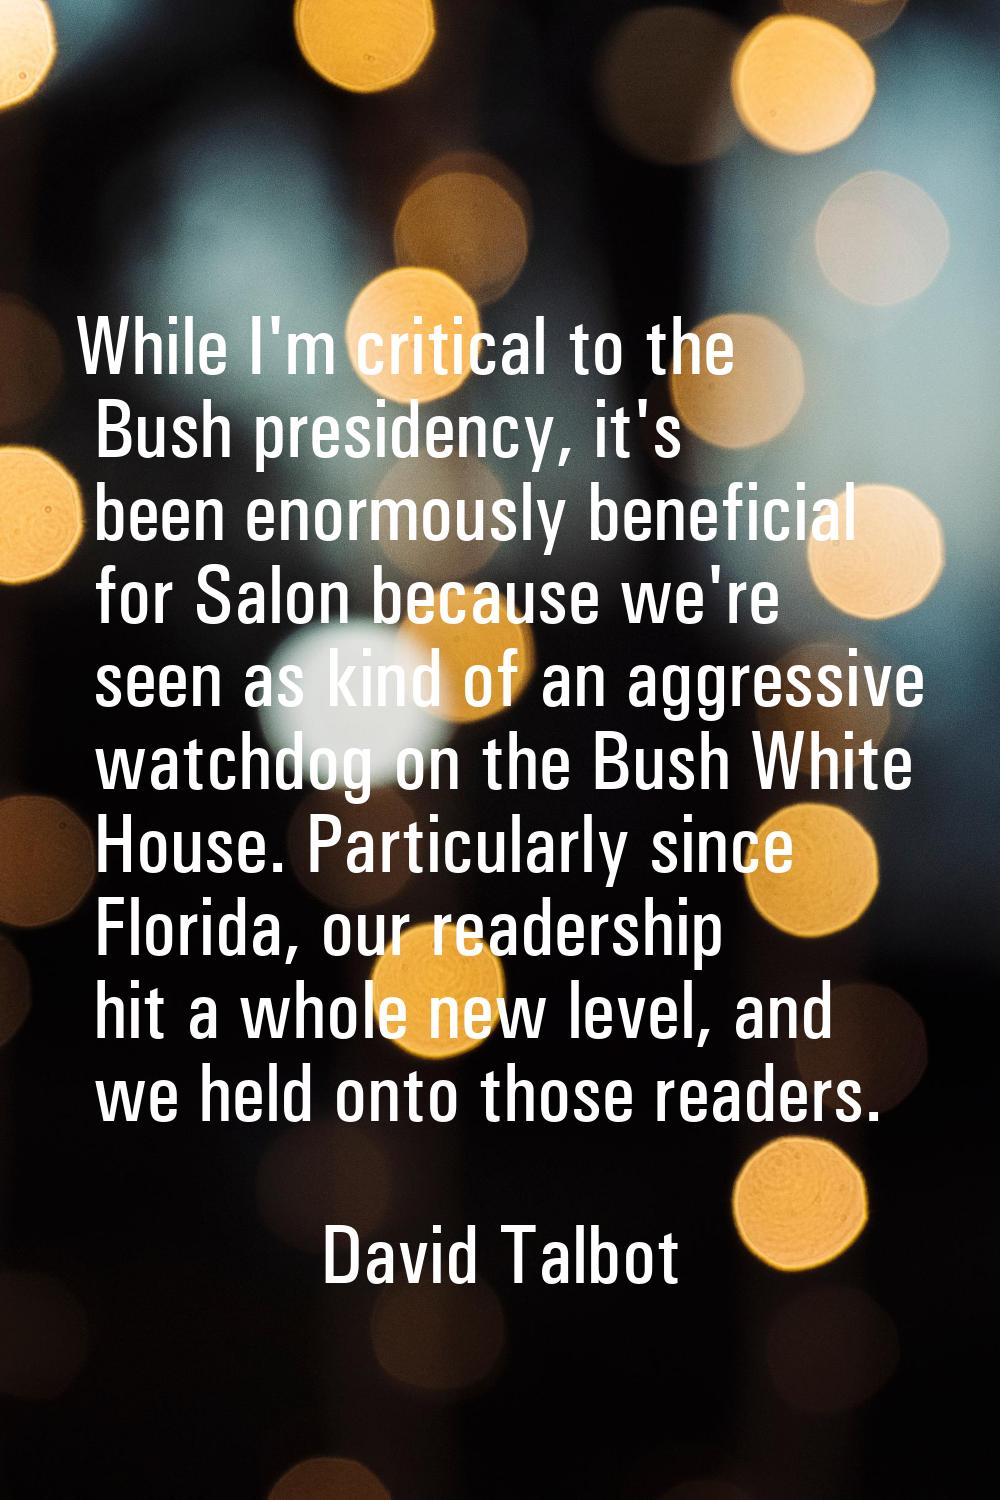 While I'm critical to the Bush presidency, it's been enormously beneficial for Salon because we're 